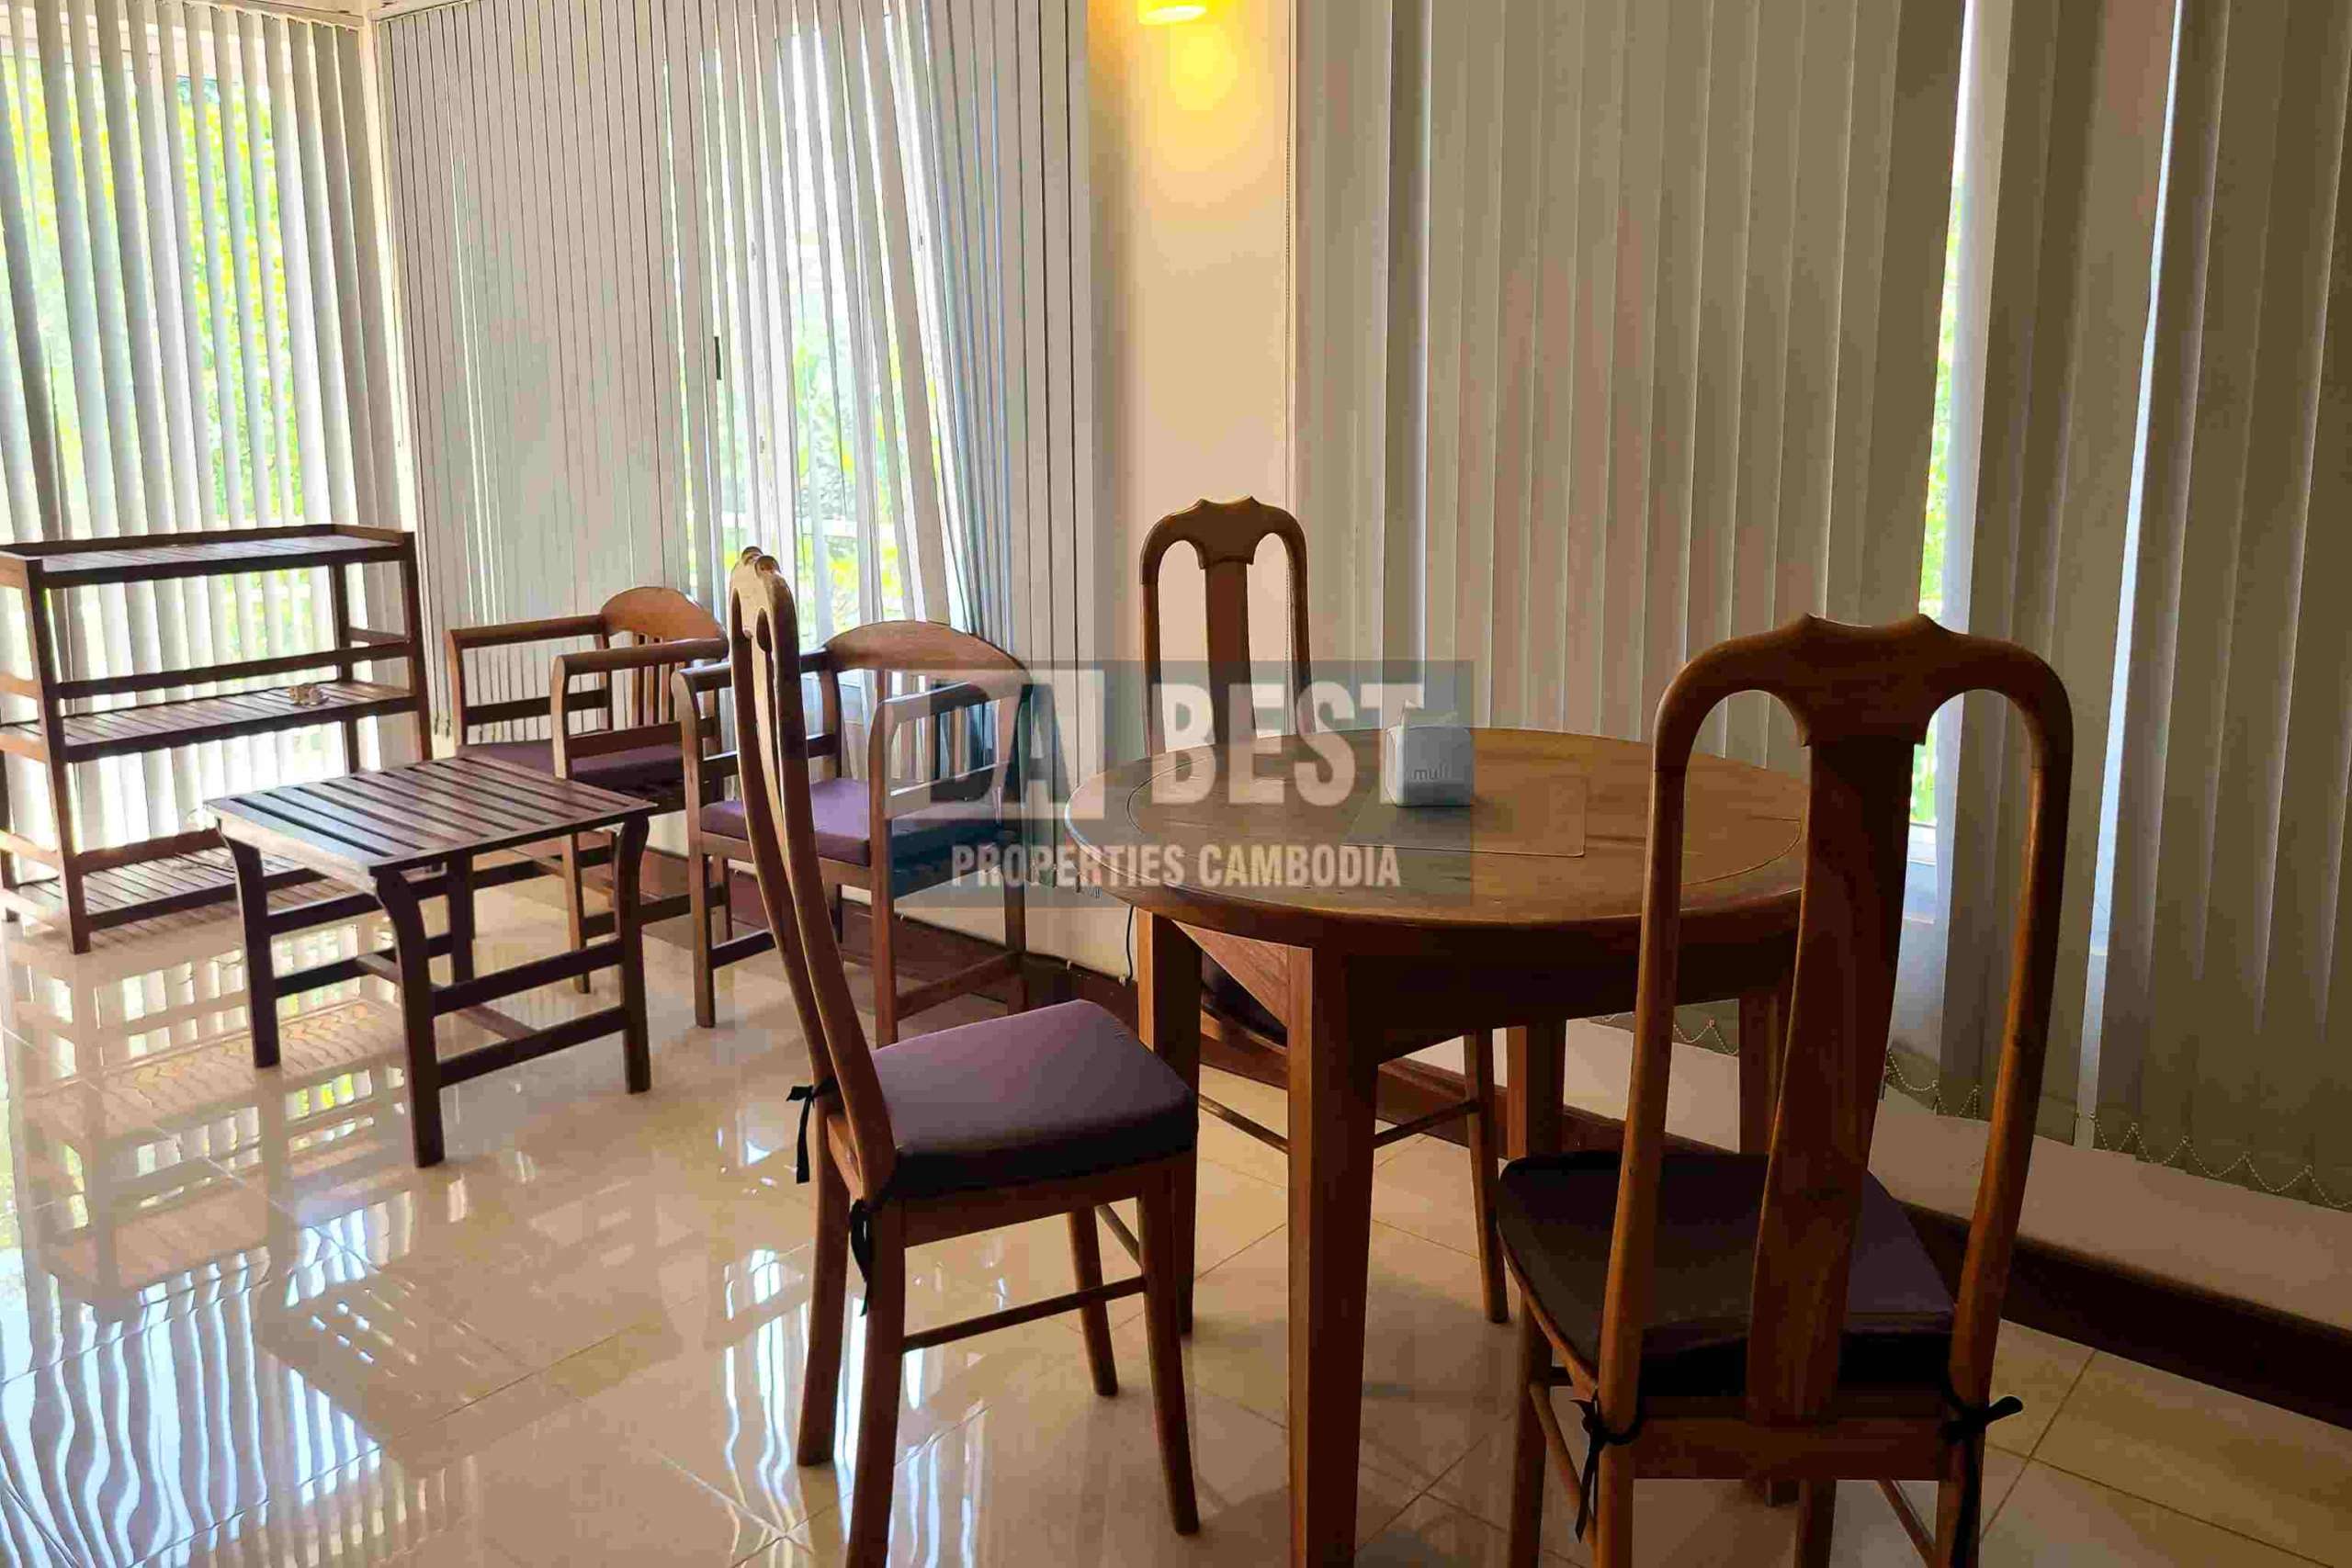 Modern Private Villa 4 Bedroom For Rent in Siem Reap - Living area - 1